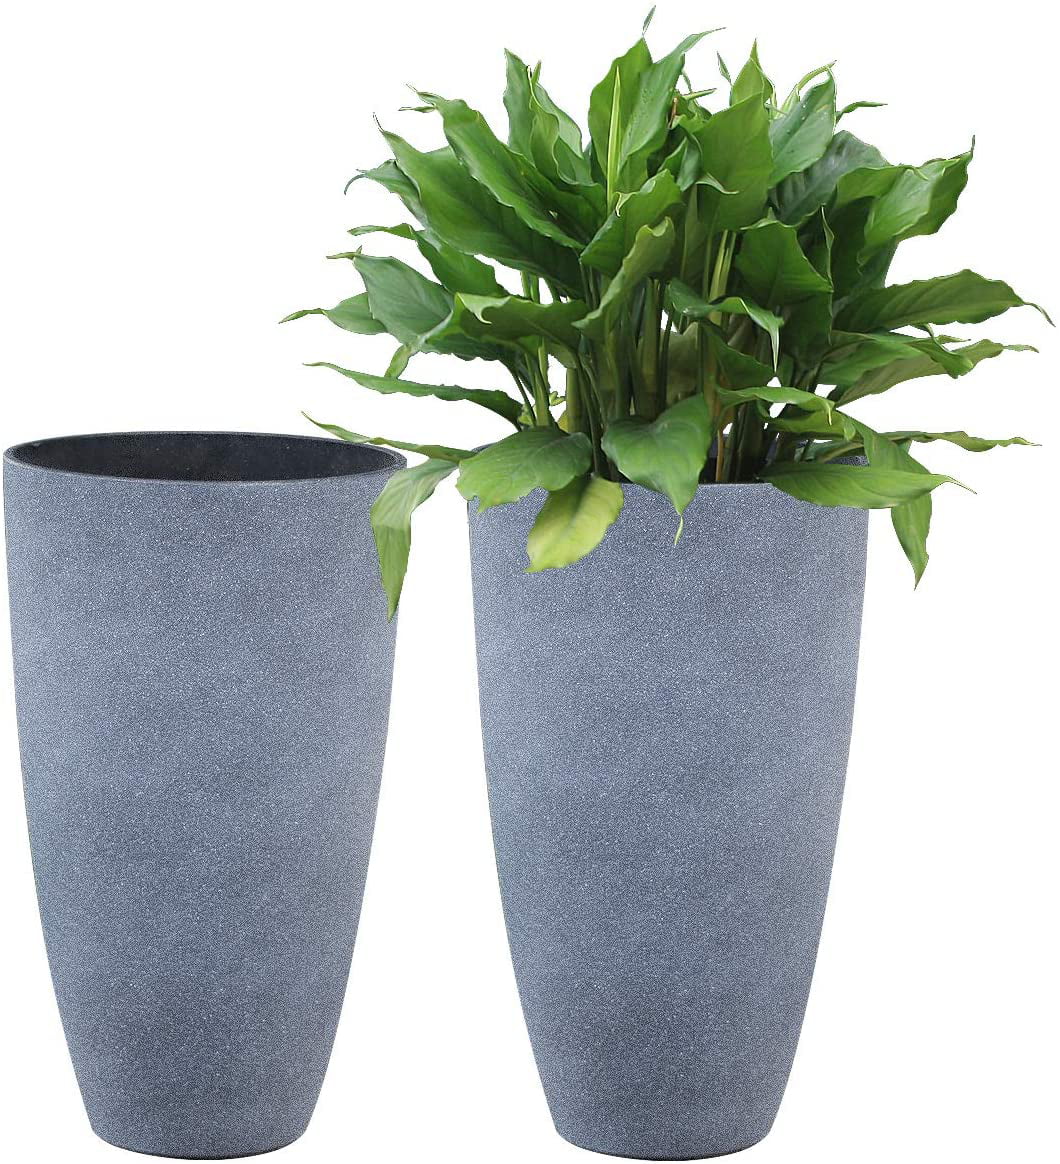 Large Outdoor Tall Planters   18 inch Indoor Round Big Flower Tree Pot with  Drainage, Set of 18, Speckled White Black Weathered Gray